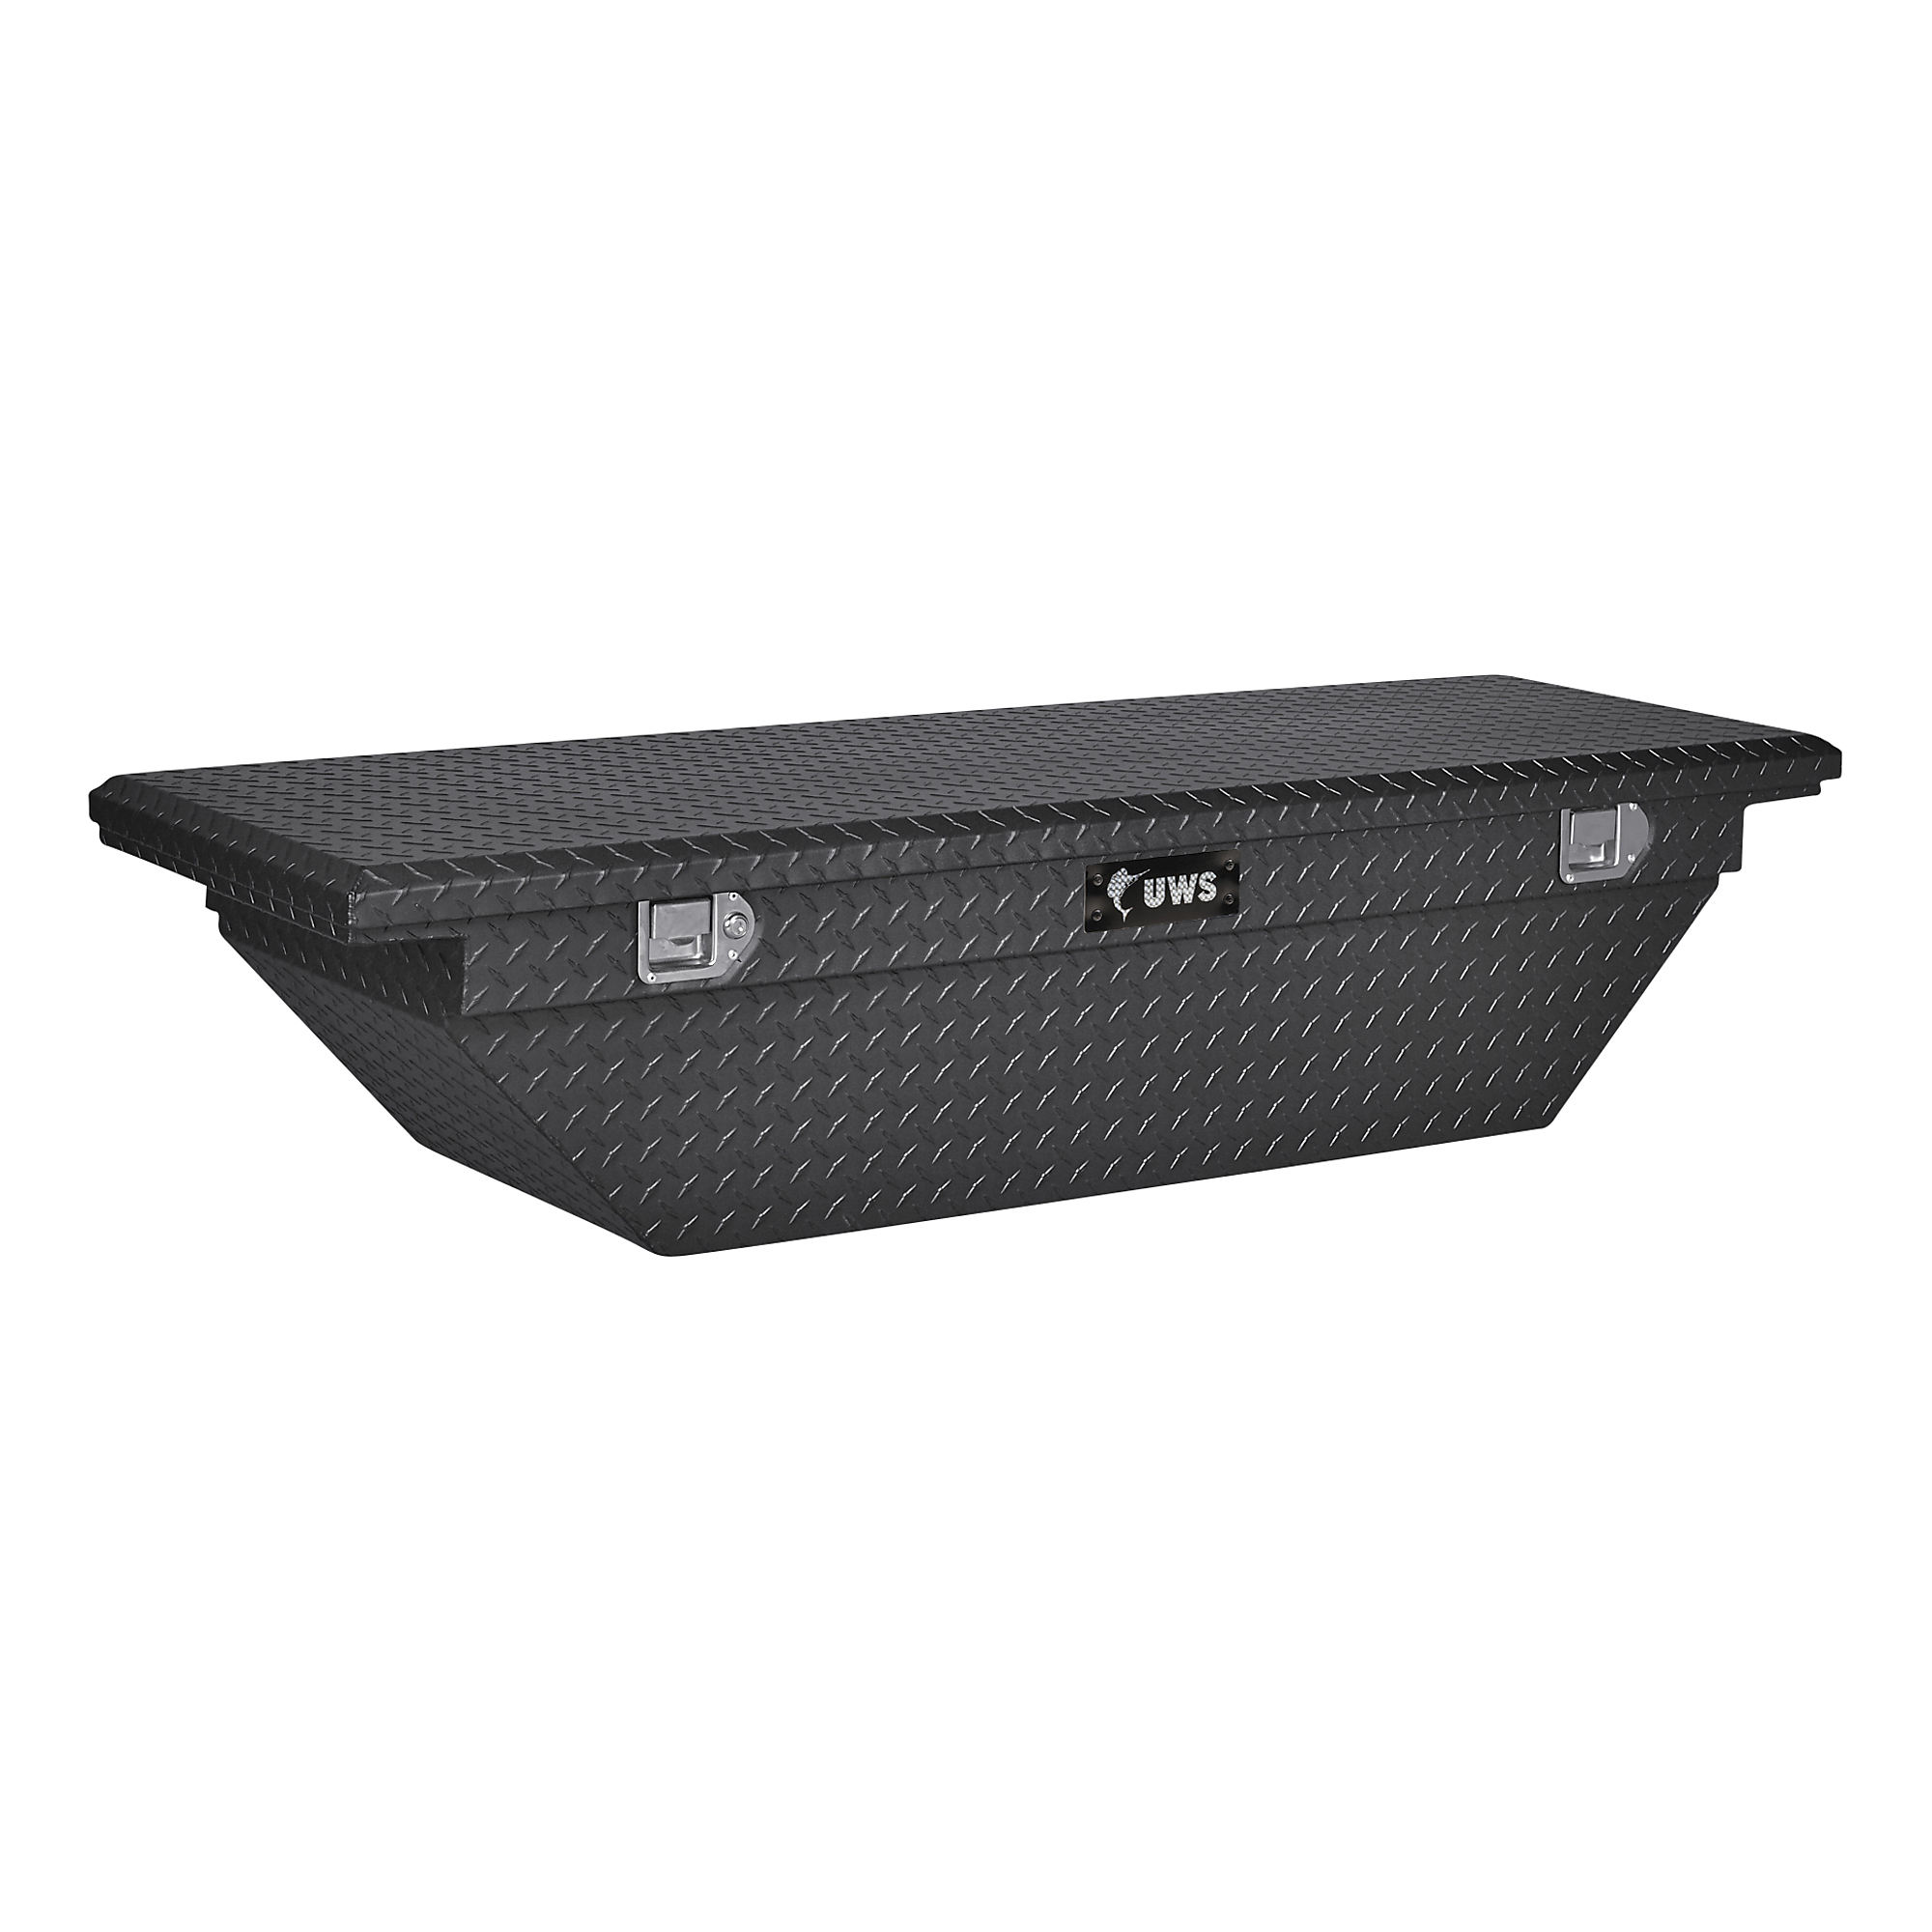 UWS, 63Inch Angled Crossover Truck Tool Box, Width 63.875 in, Material Aluminum, Color Finish Matte Black, Model EC10313